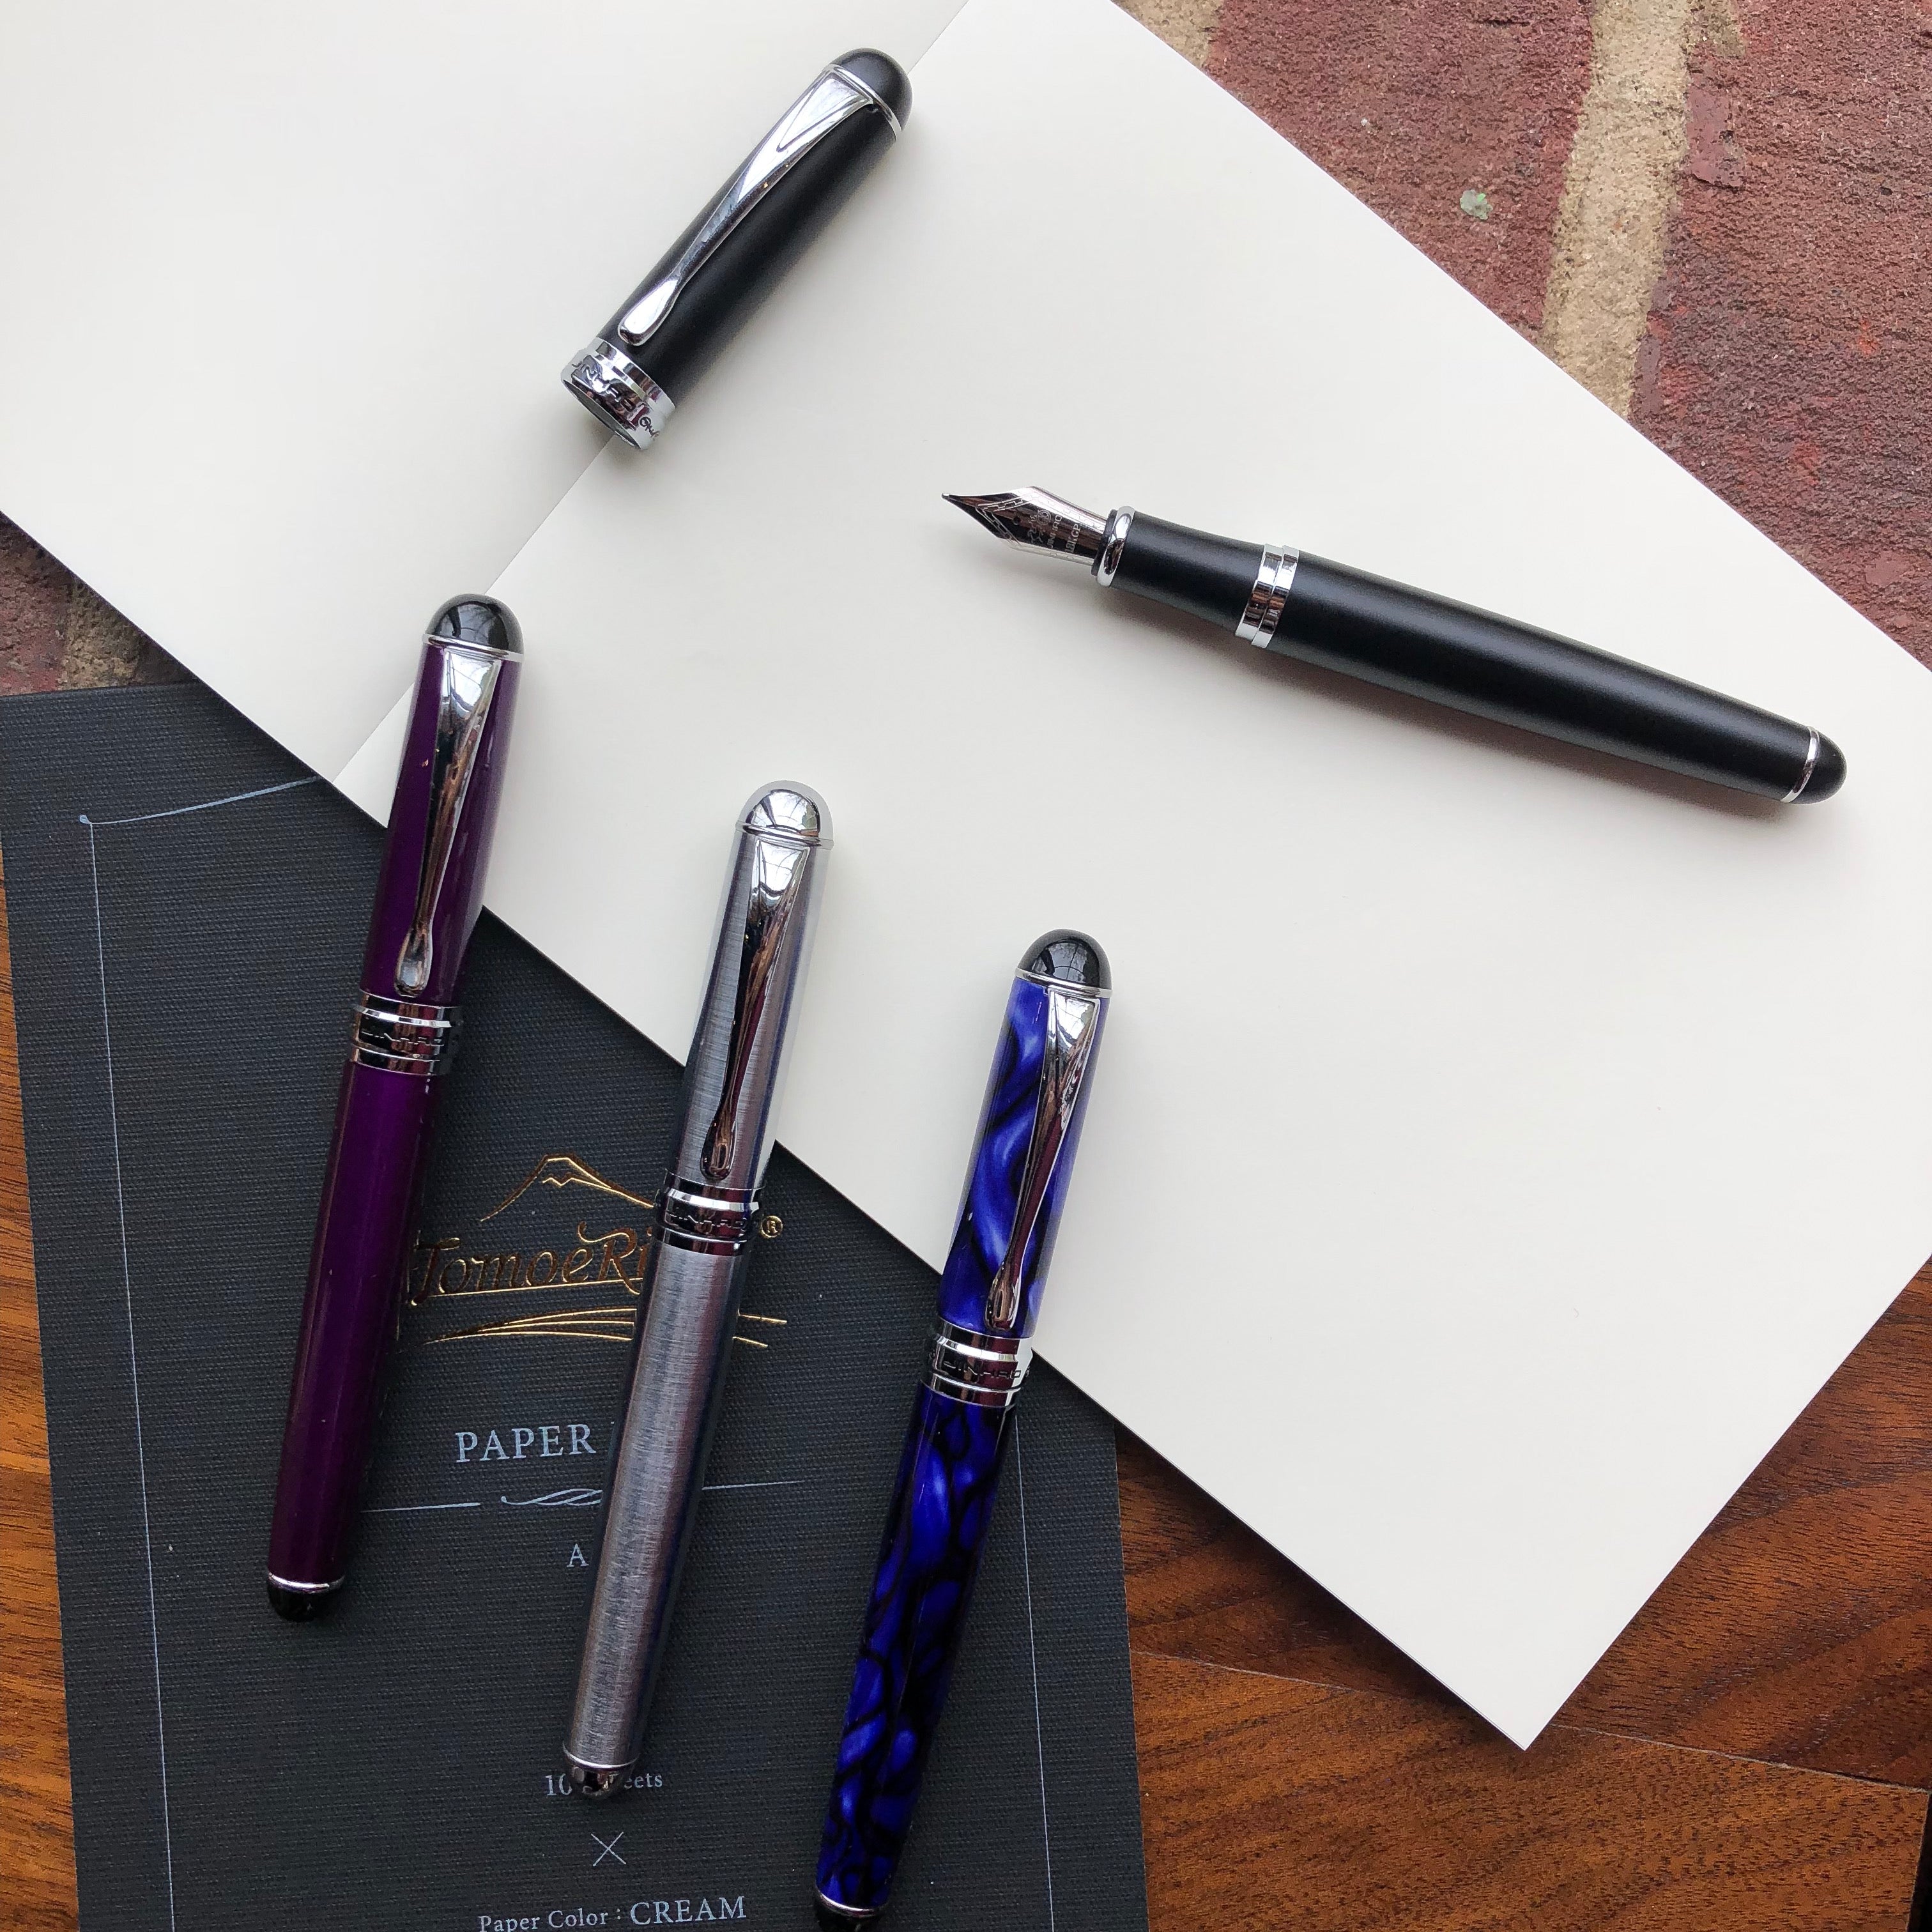 Luxury Jinhao 750 fountain pen with black and silver lattice shape